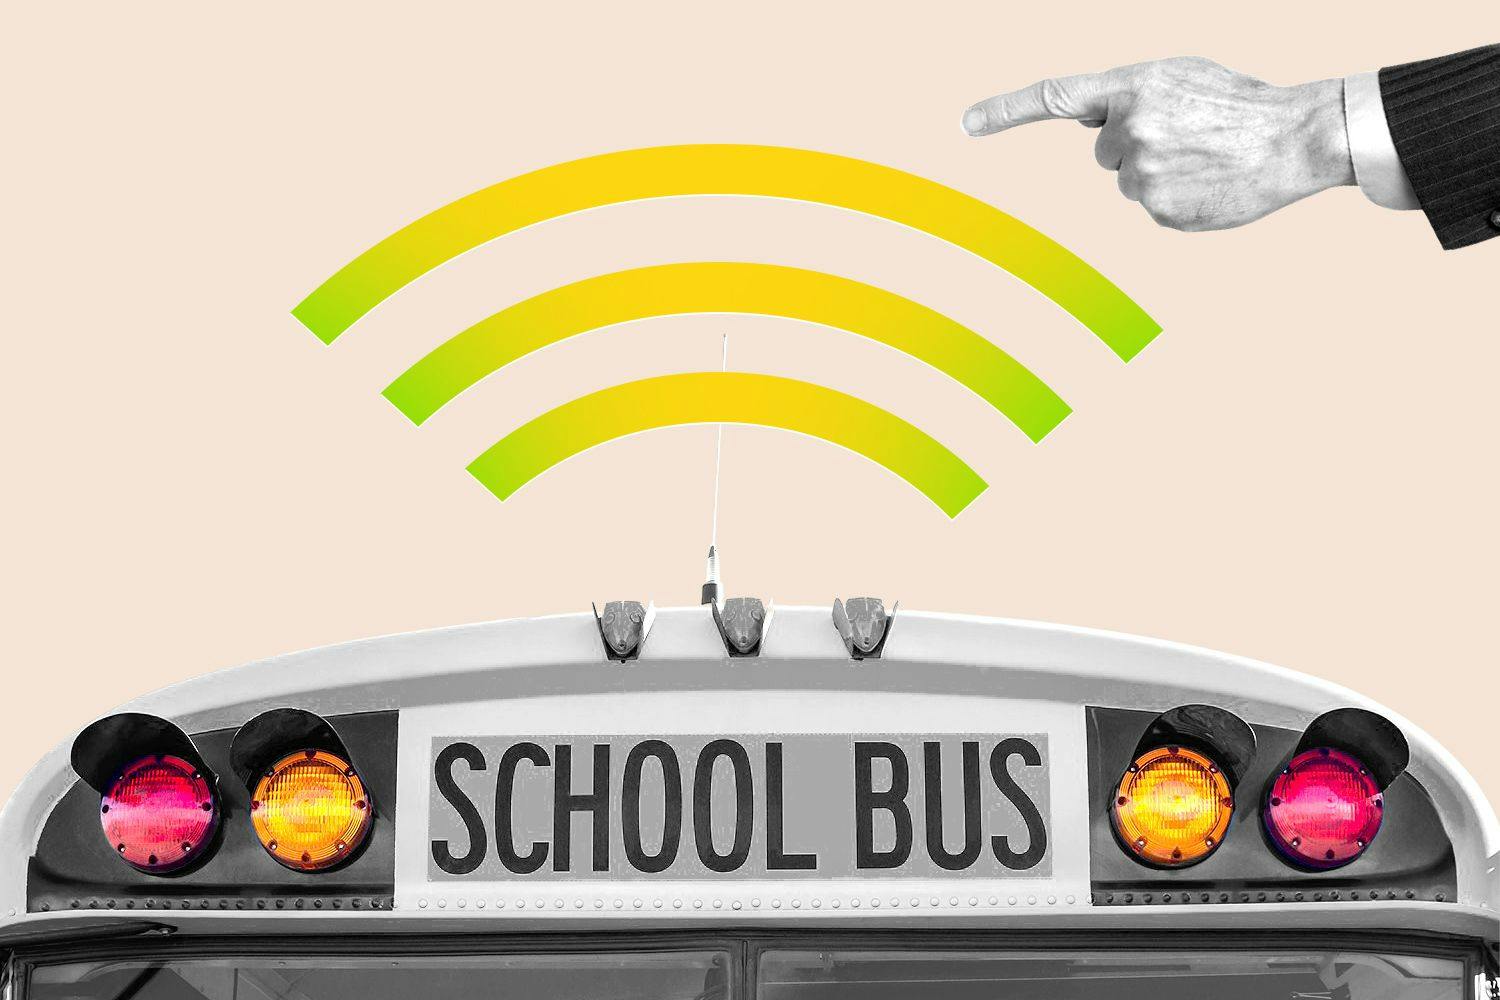 School bus with a wifi symbol above, and a hand wagging its finger at it